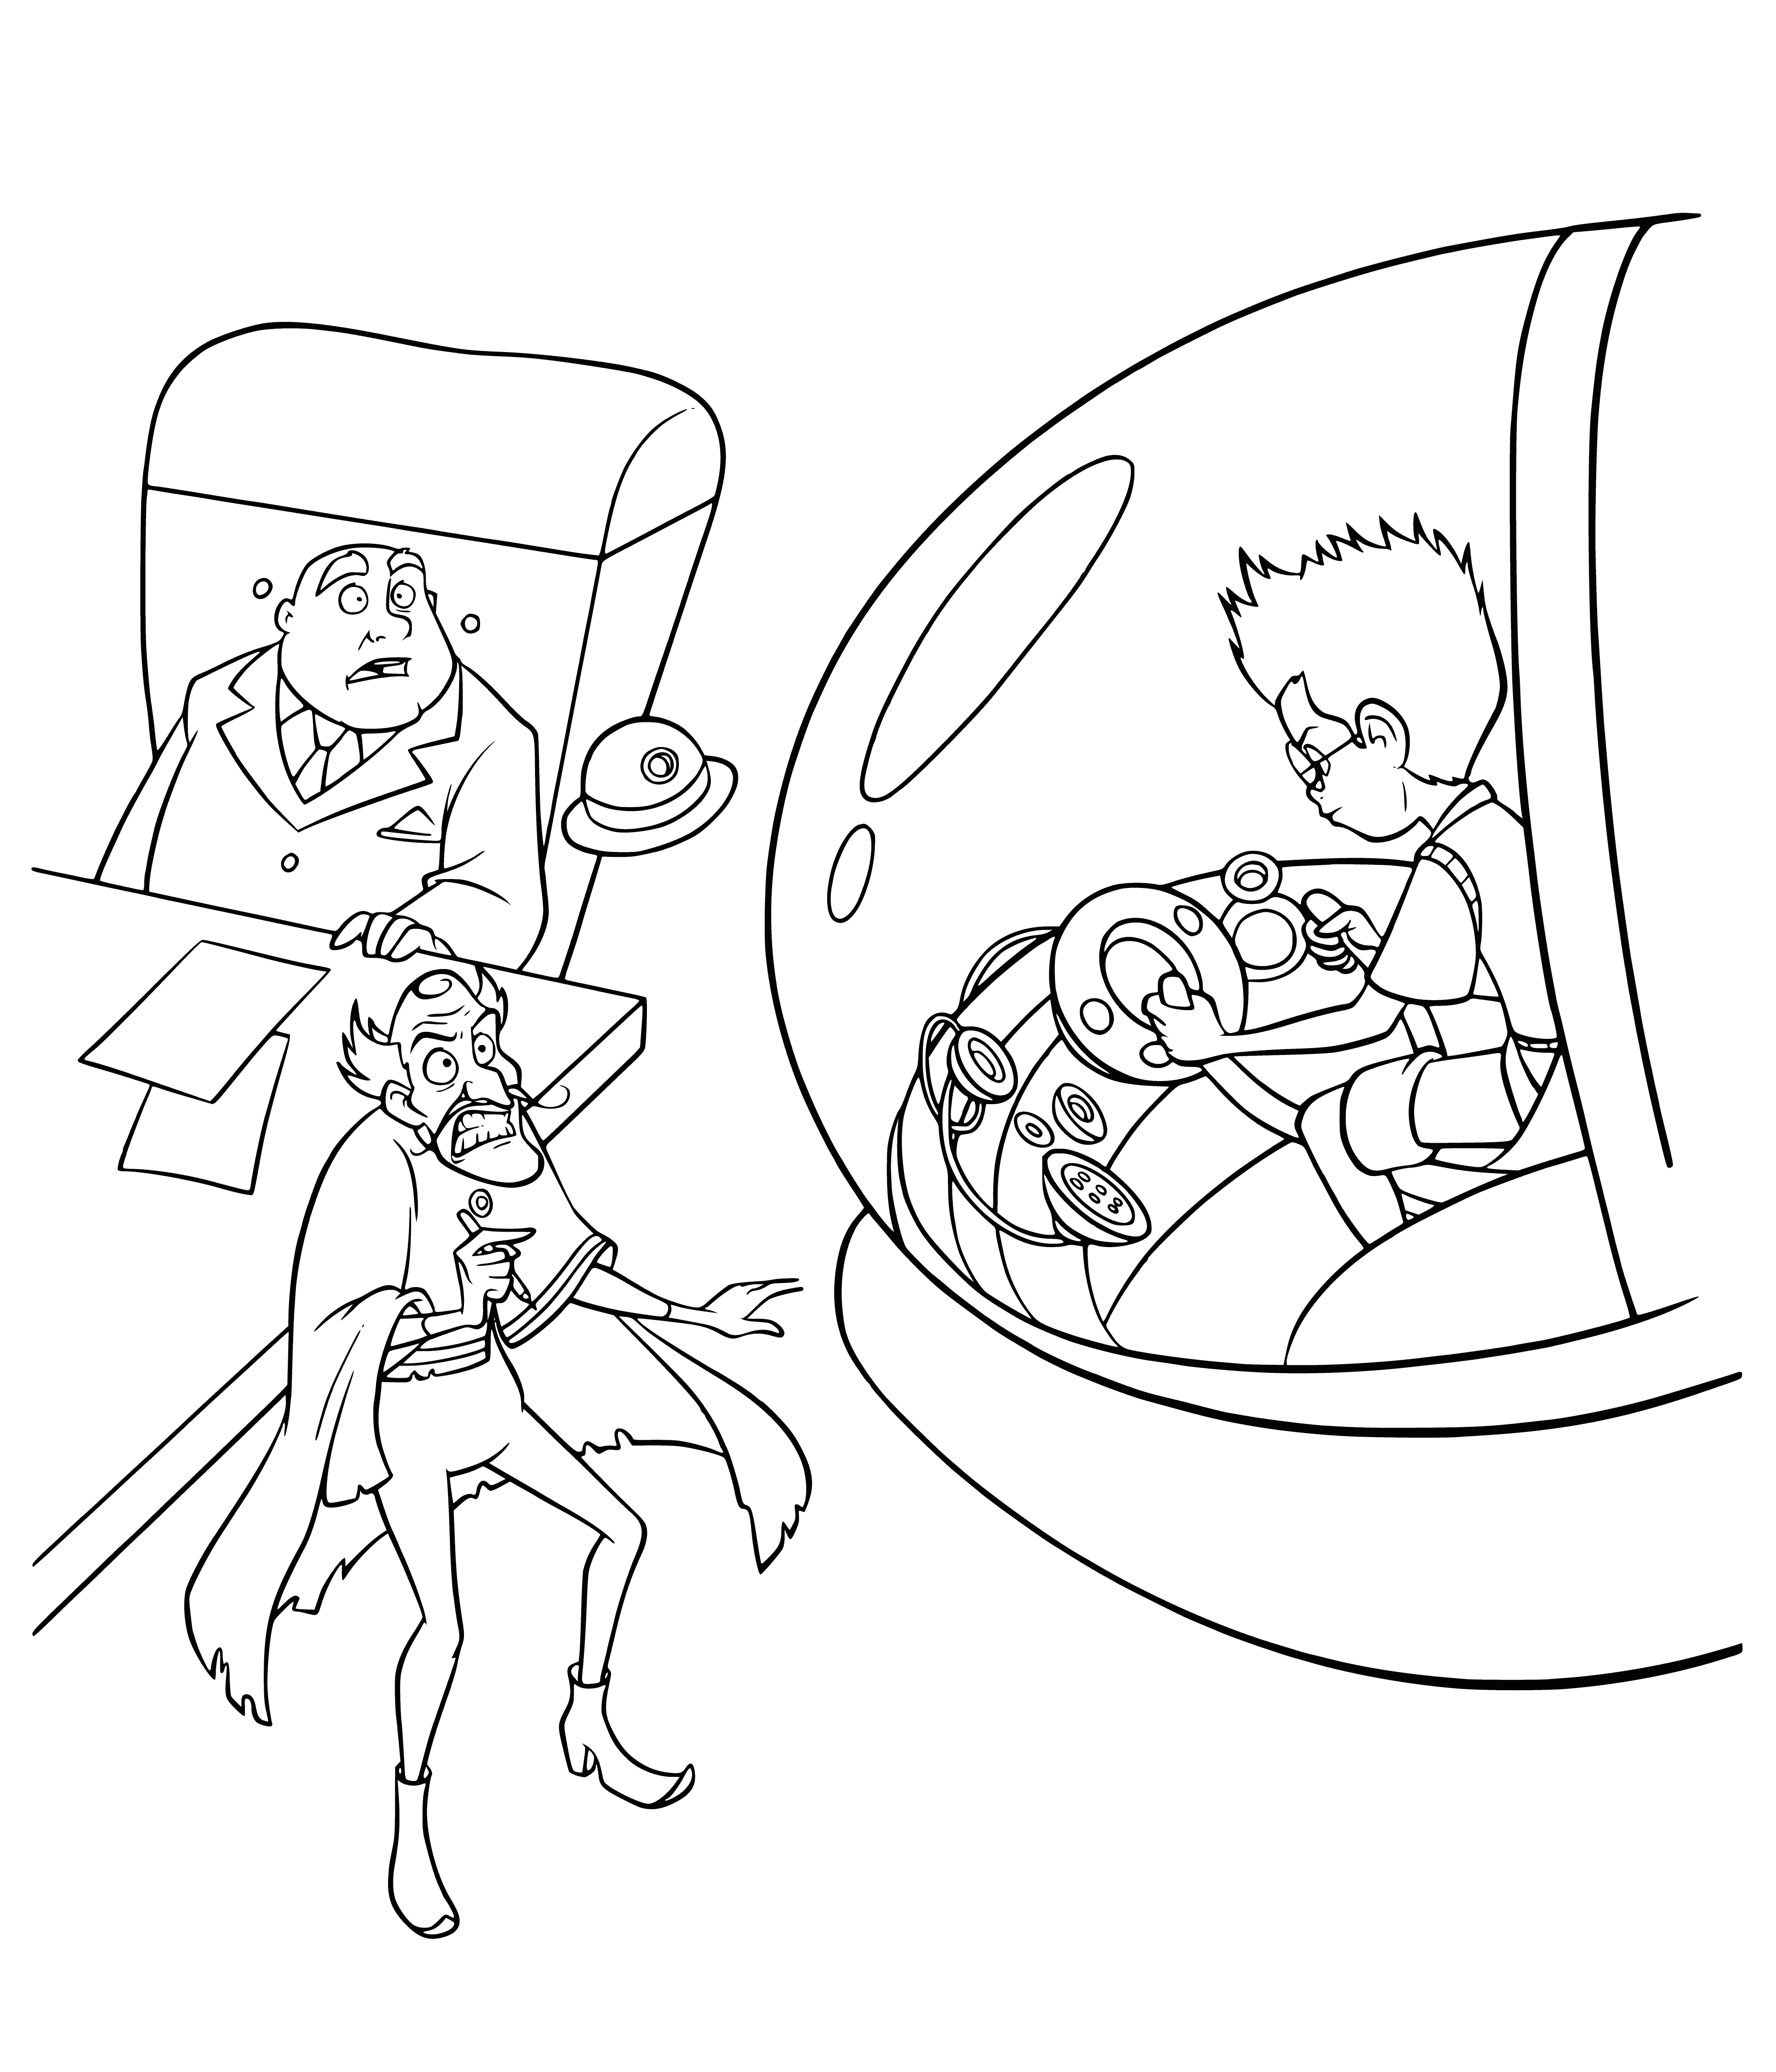 Time Machine coloring page